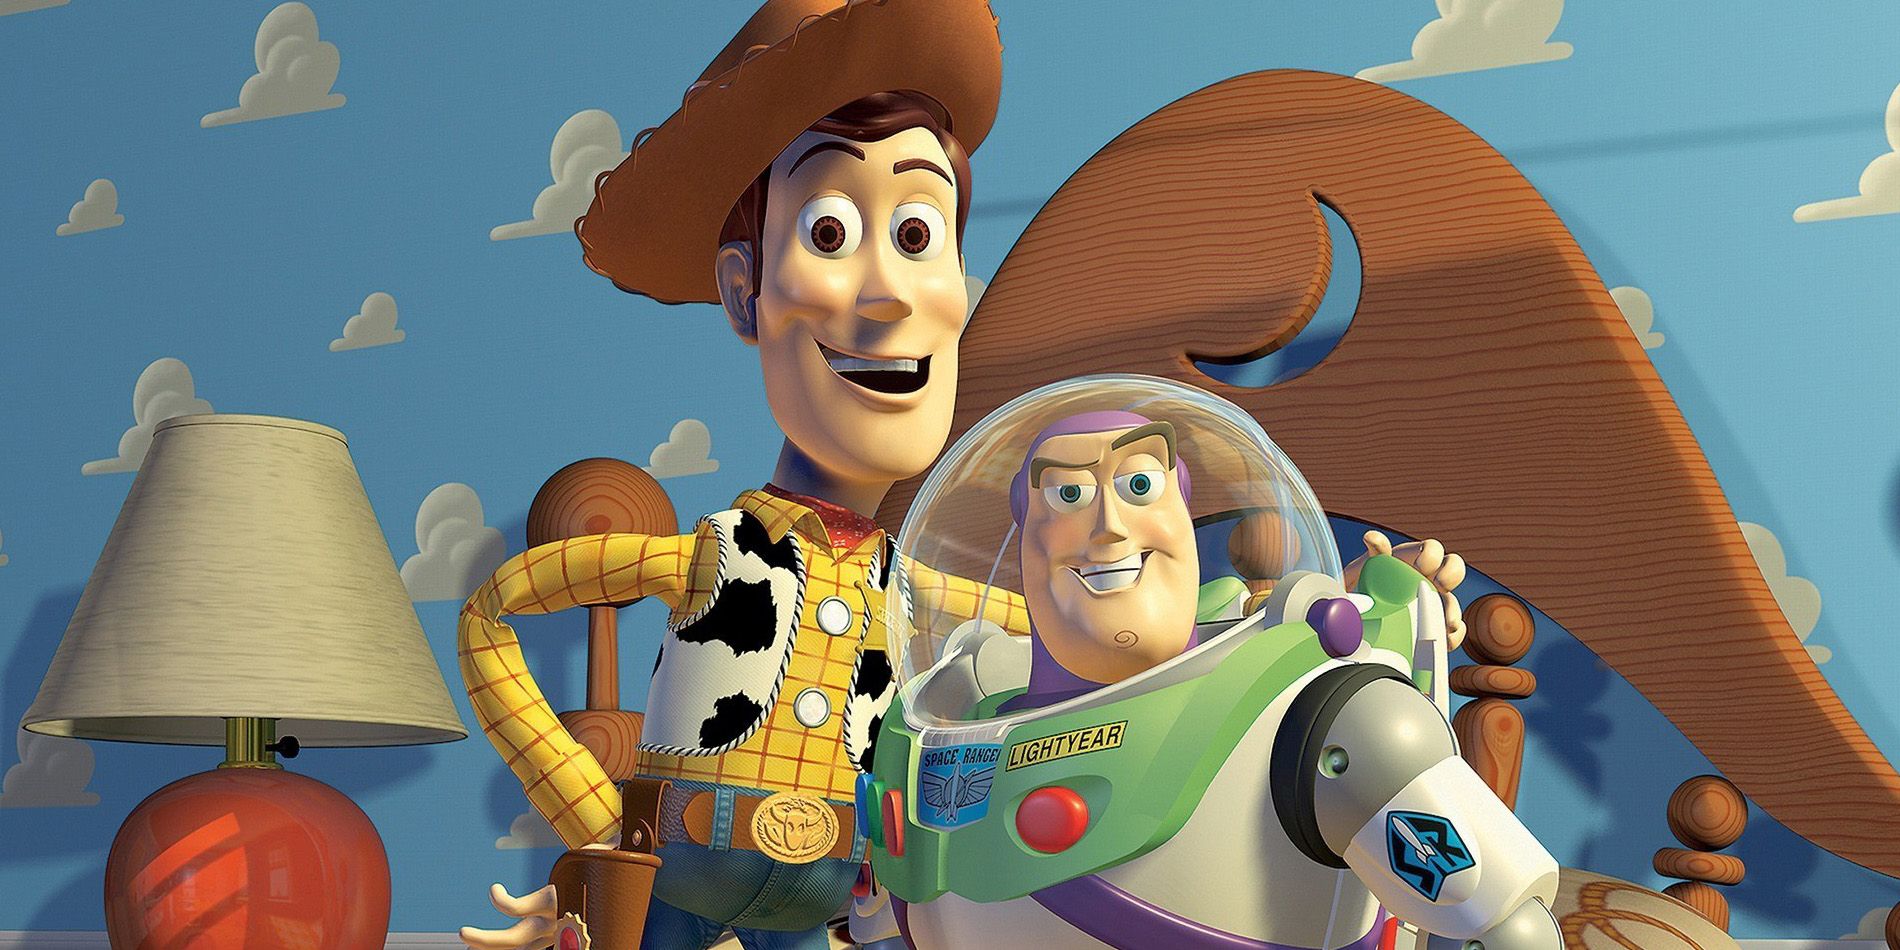 Buzz and Woody in Andy's Room in Toy Story